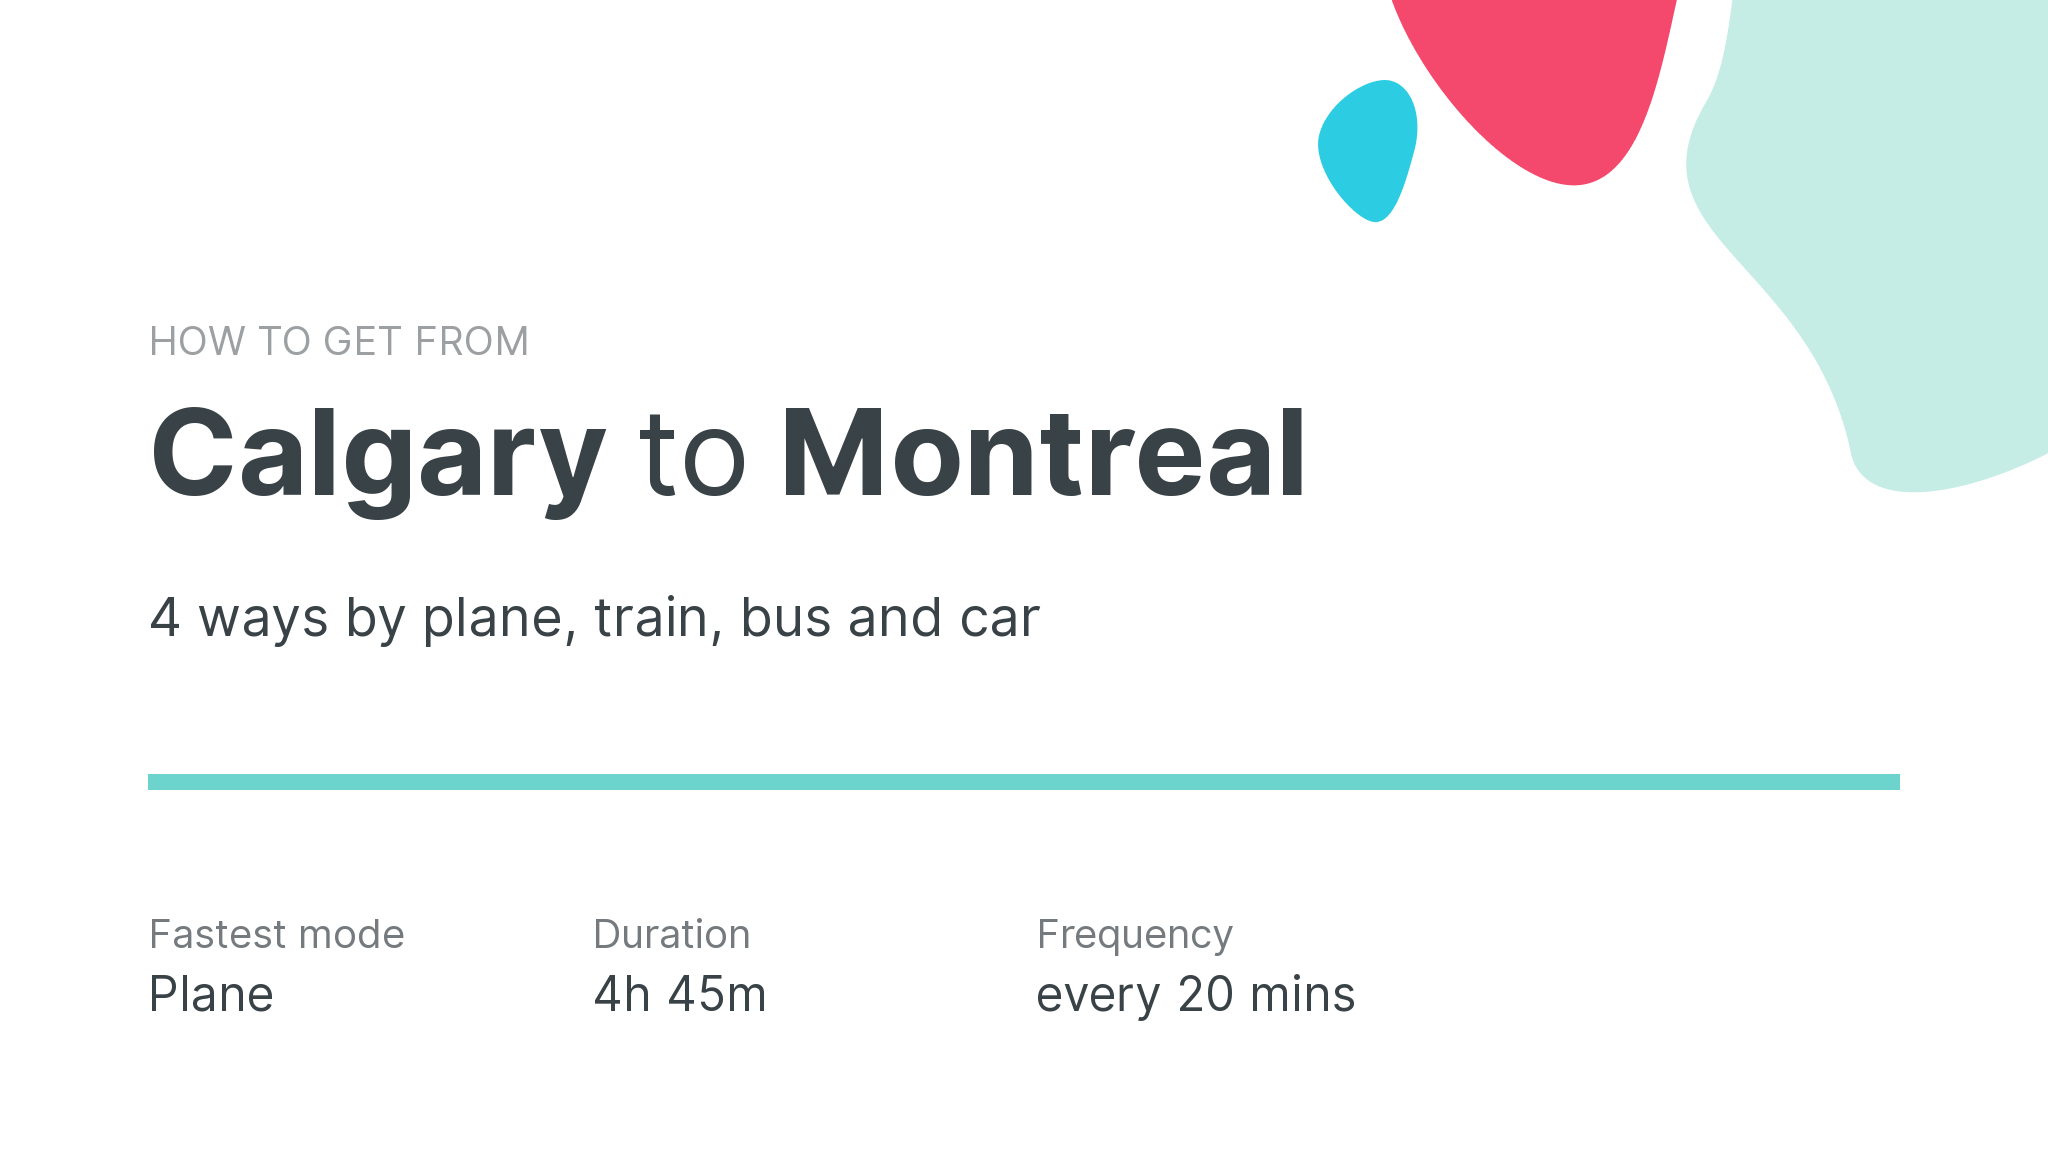 How do I get from Calgary to Montreal